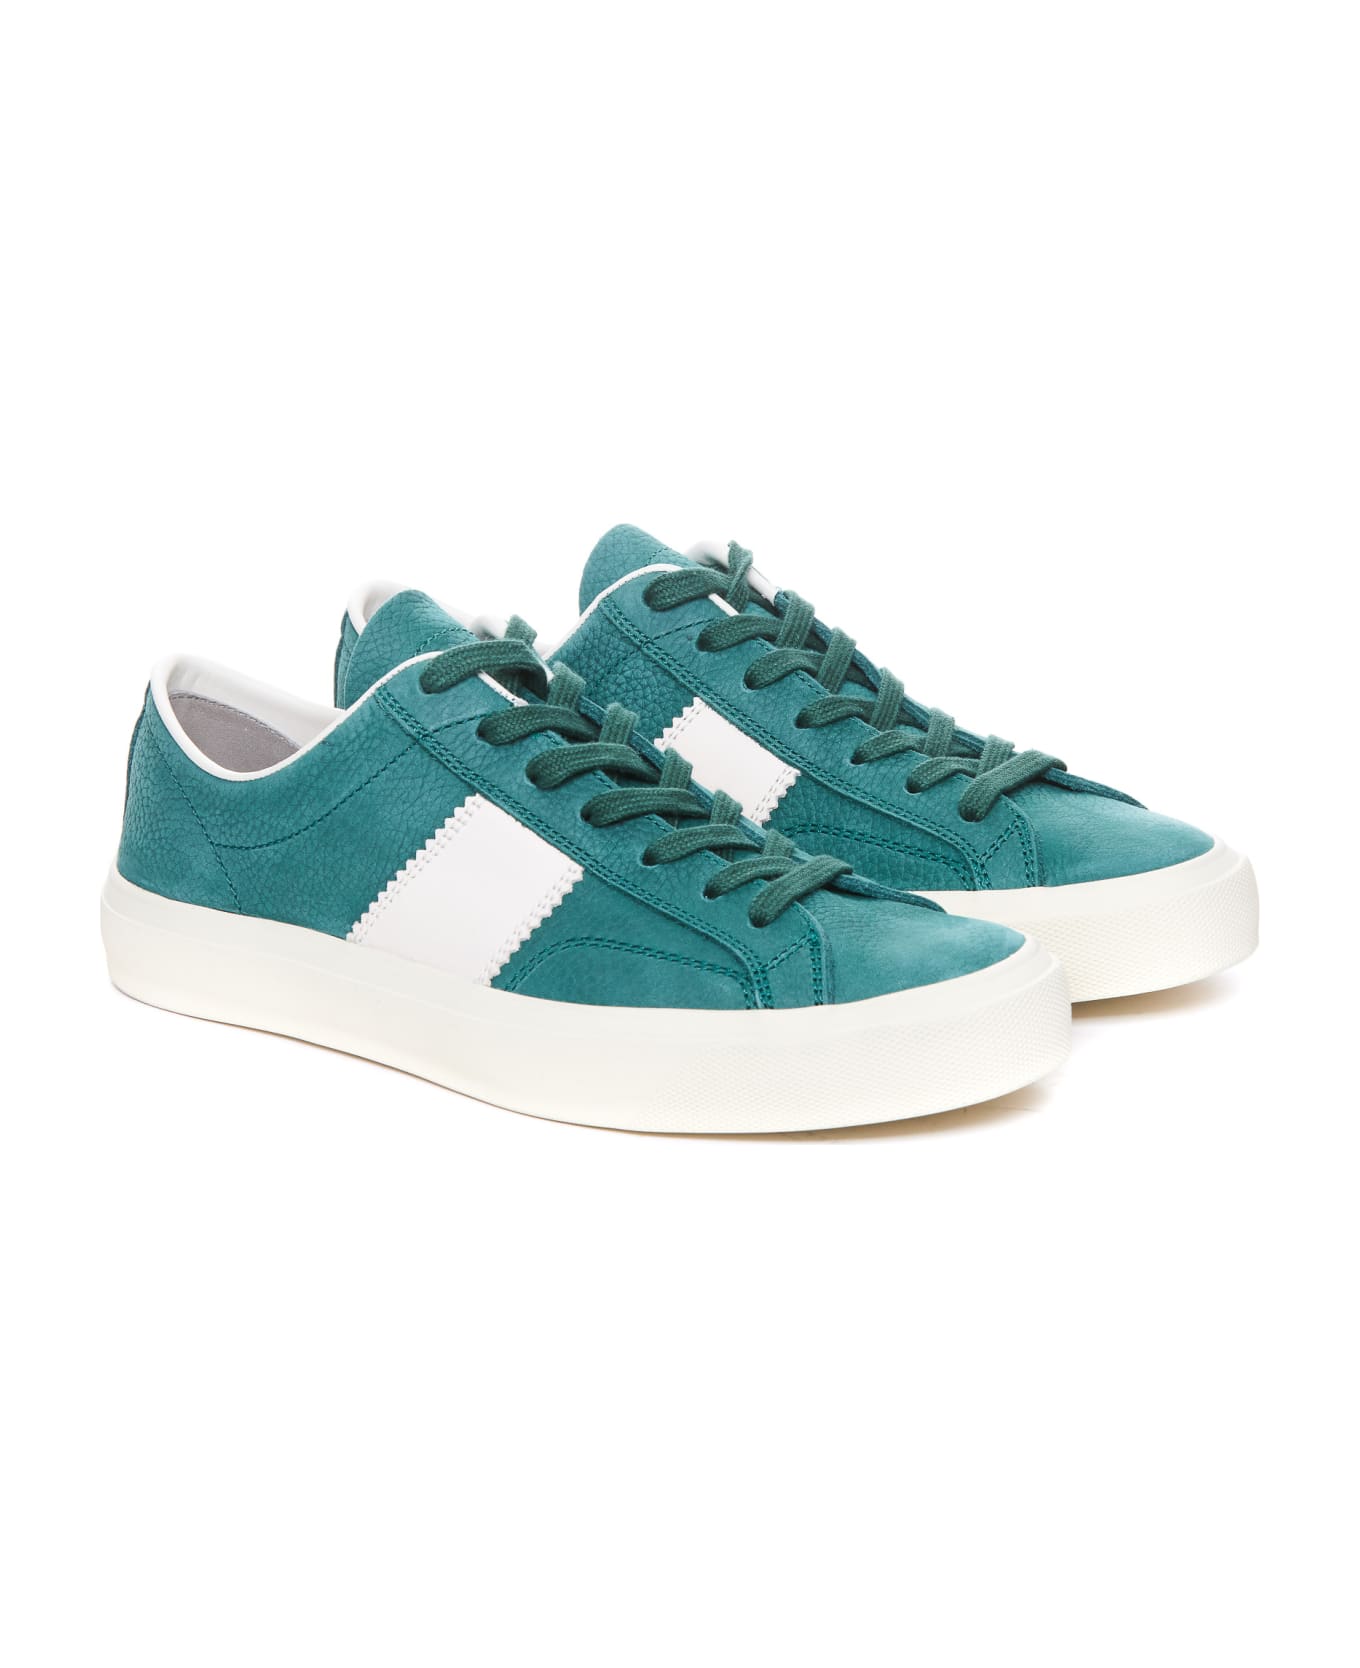 Tom Ford Suede Cambridge Sneakers - Green